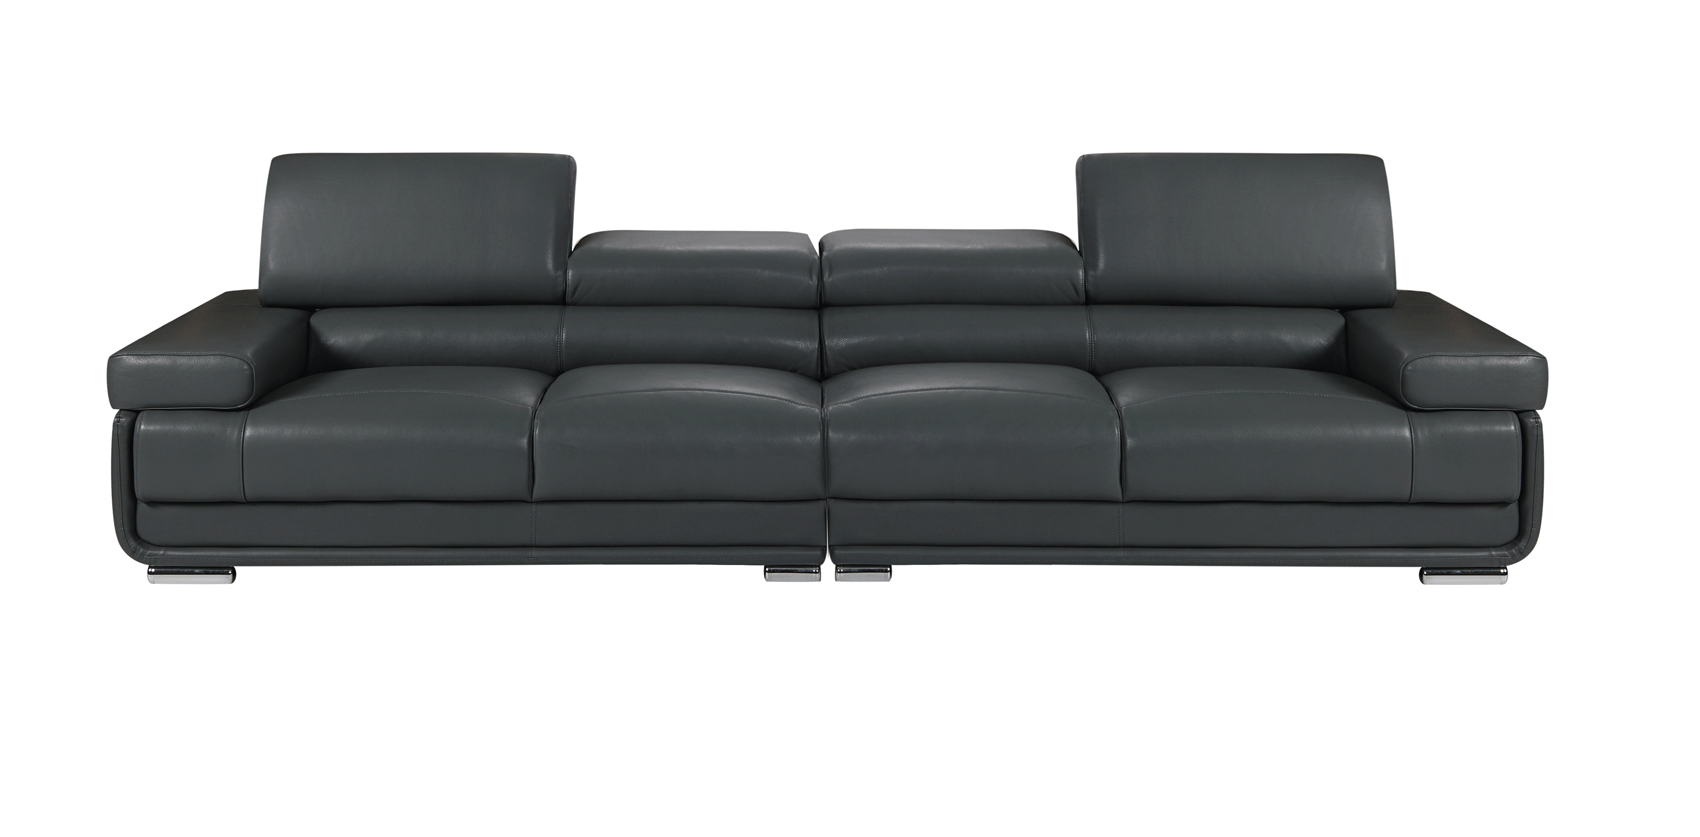 Living Room Furniture Sectionals 2119 Sofa, Loveseat, Chair